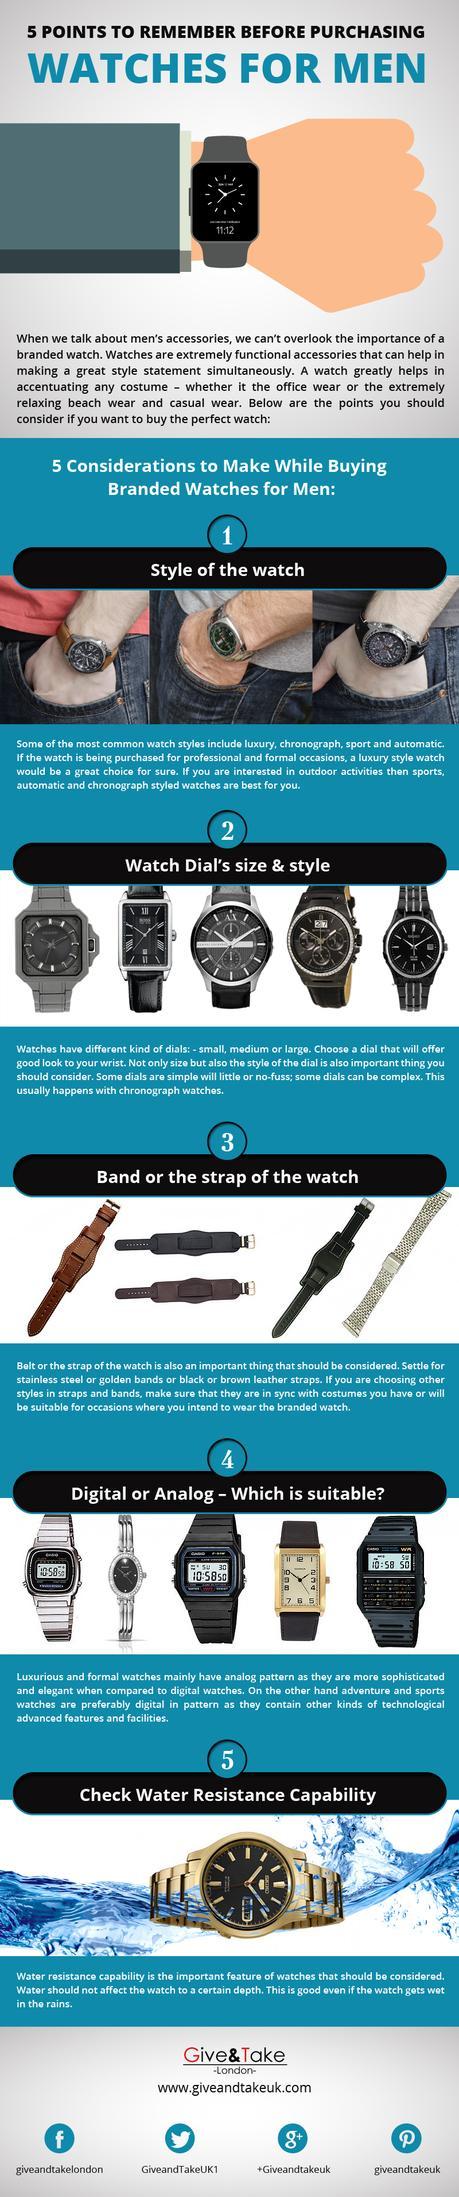 Purchasing Watches for Men